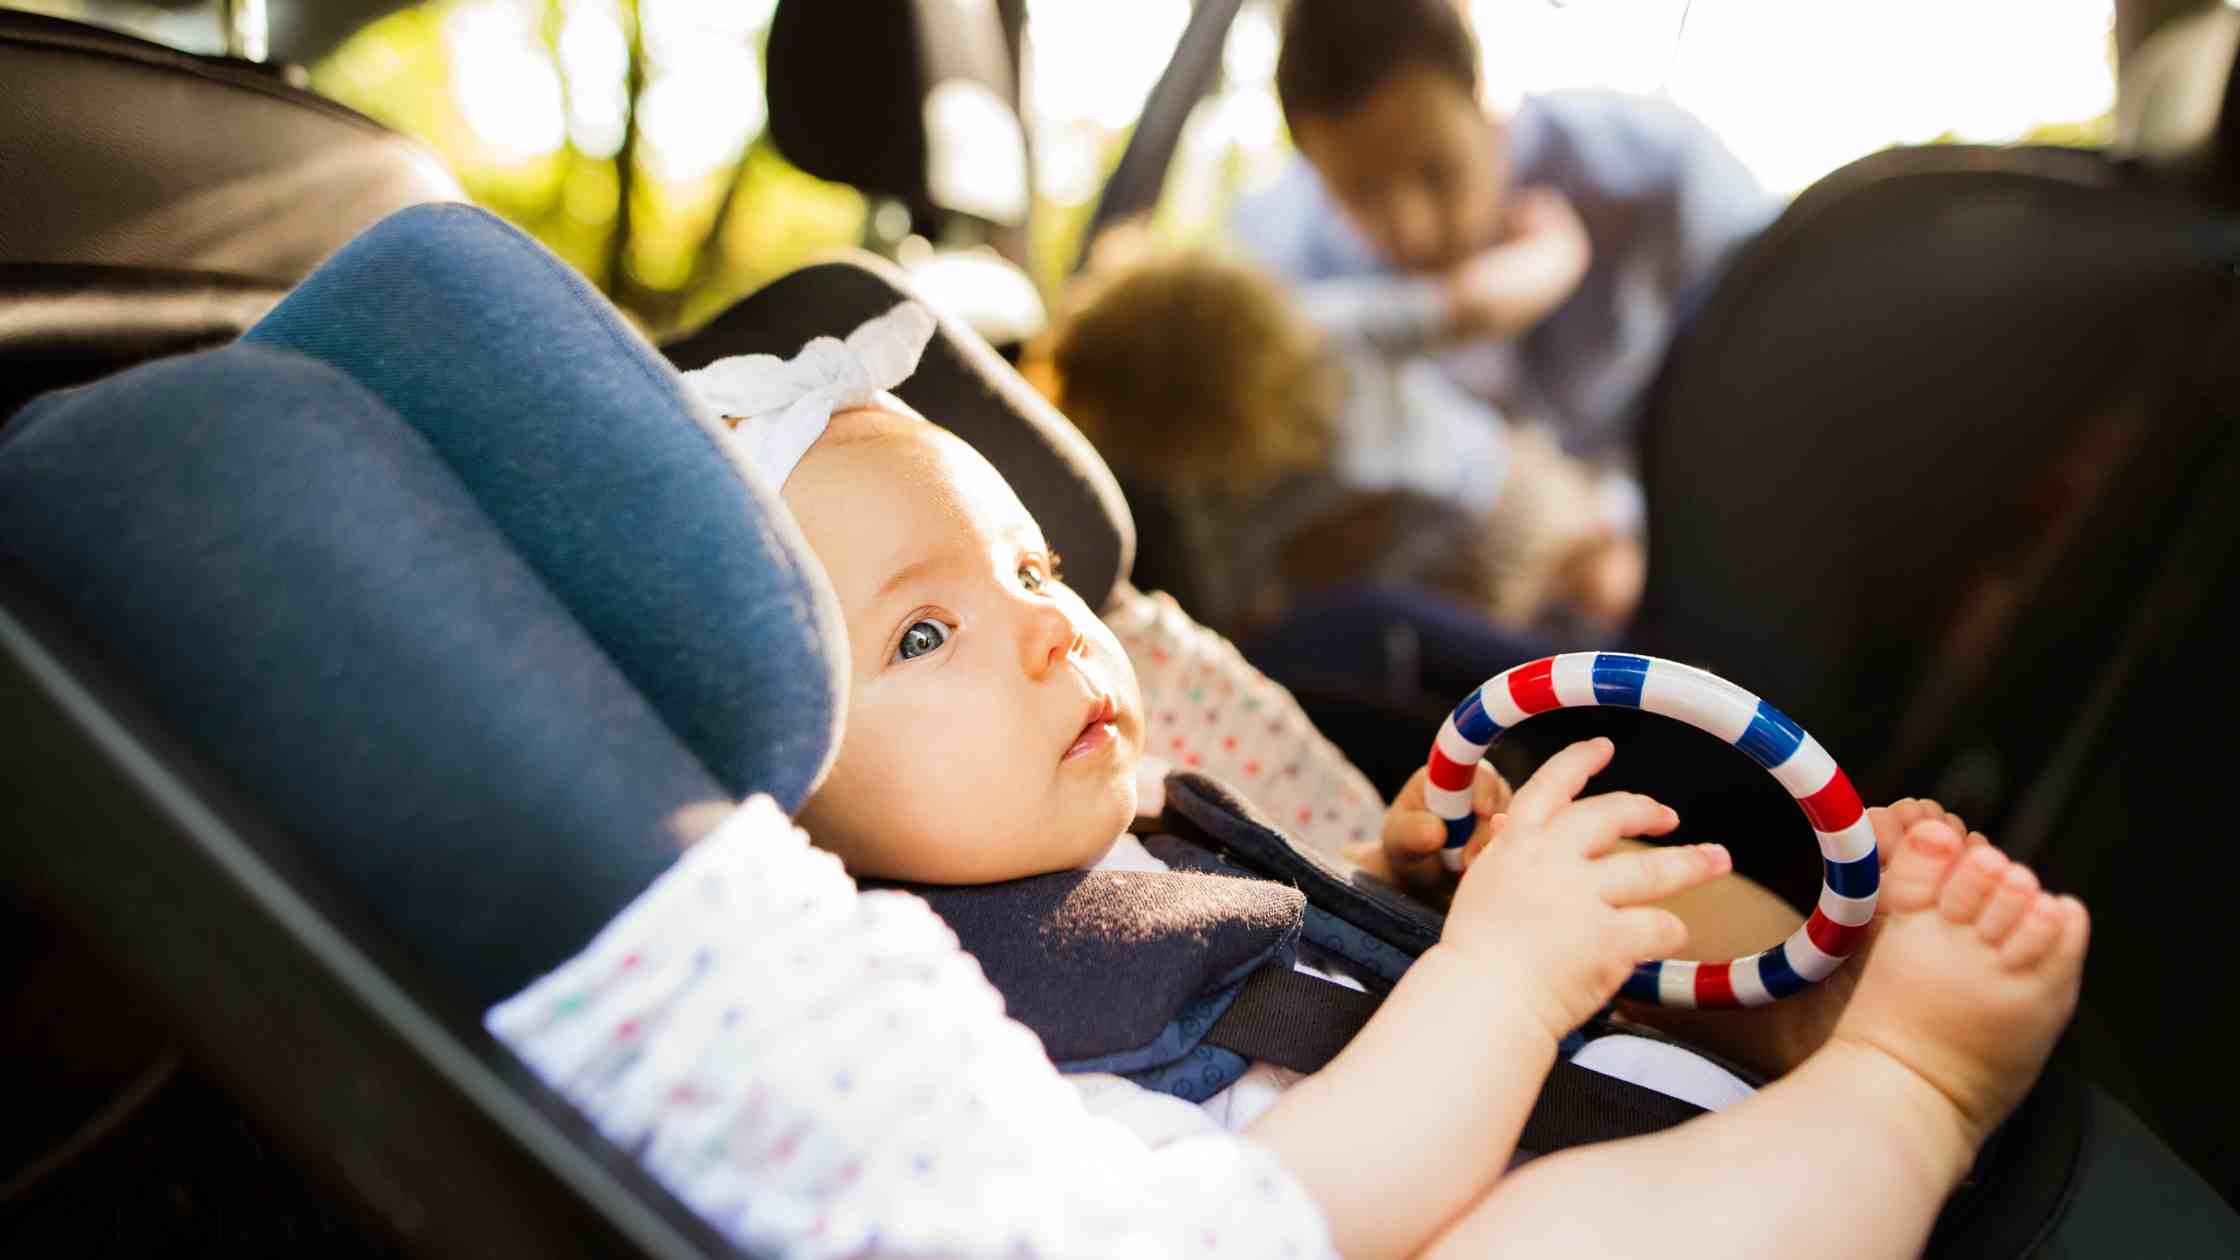 Car Seat Expiration: How Long Are Car Seats Good For?